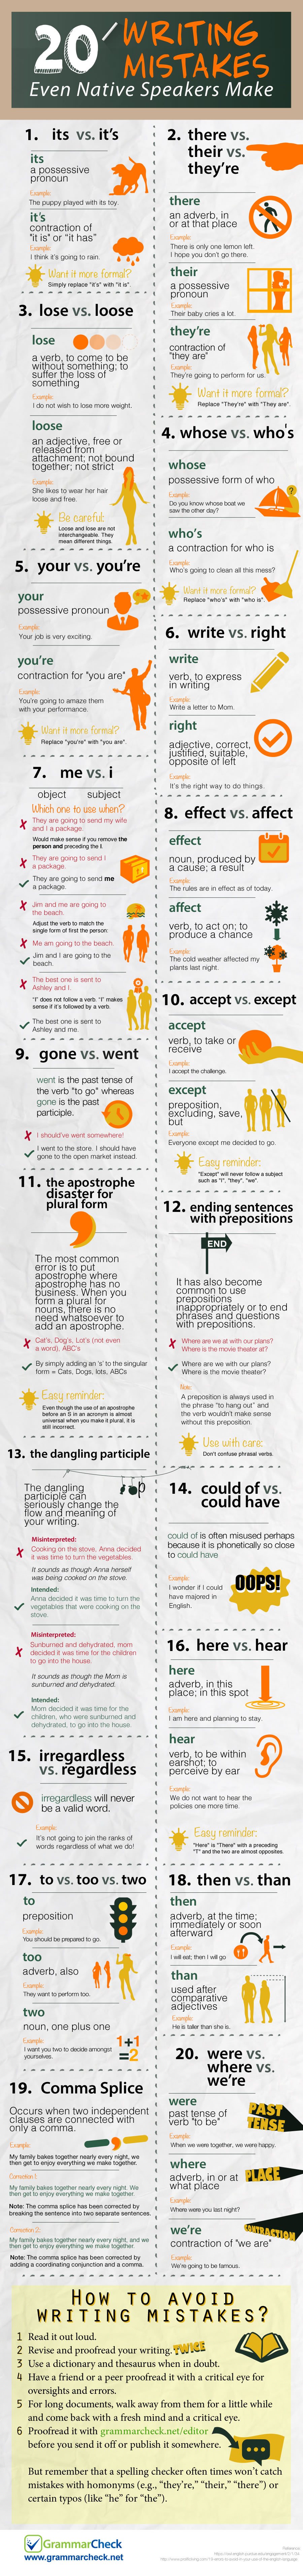 20 Writing Mistakes Even Native Speakers Make (Infographic)